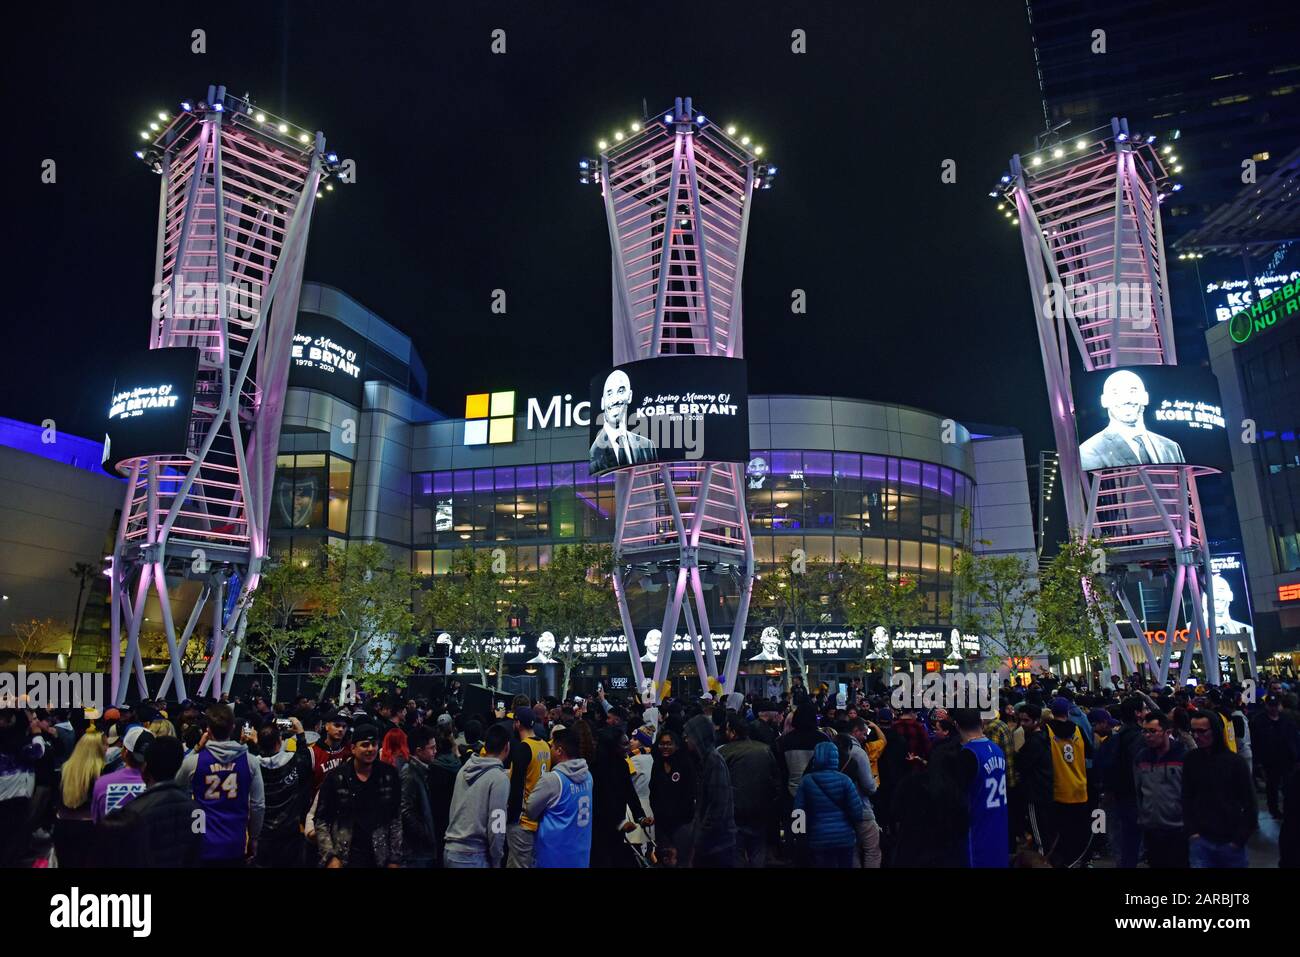 Los Angeles, United States. 27th Jan, 2020. LA Laker fans gather in a plaza at LA LIVE near the Staples Center in Los Angeles to mourn the loss of NBA star Kobe Bryant. Bryant, his daughter Gianna, 13, and seven other people were killed in a helicopter crash in Calabasas, California on Sunday, January 26, 2020. Photo by Chris Chew/UPI Credit: UPI/Alamy Live News Stock Photo